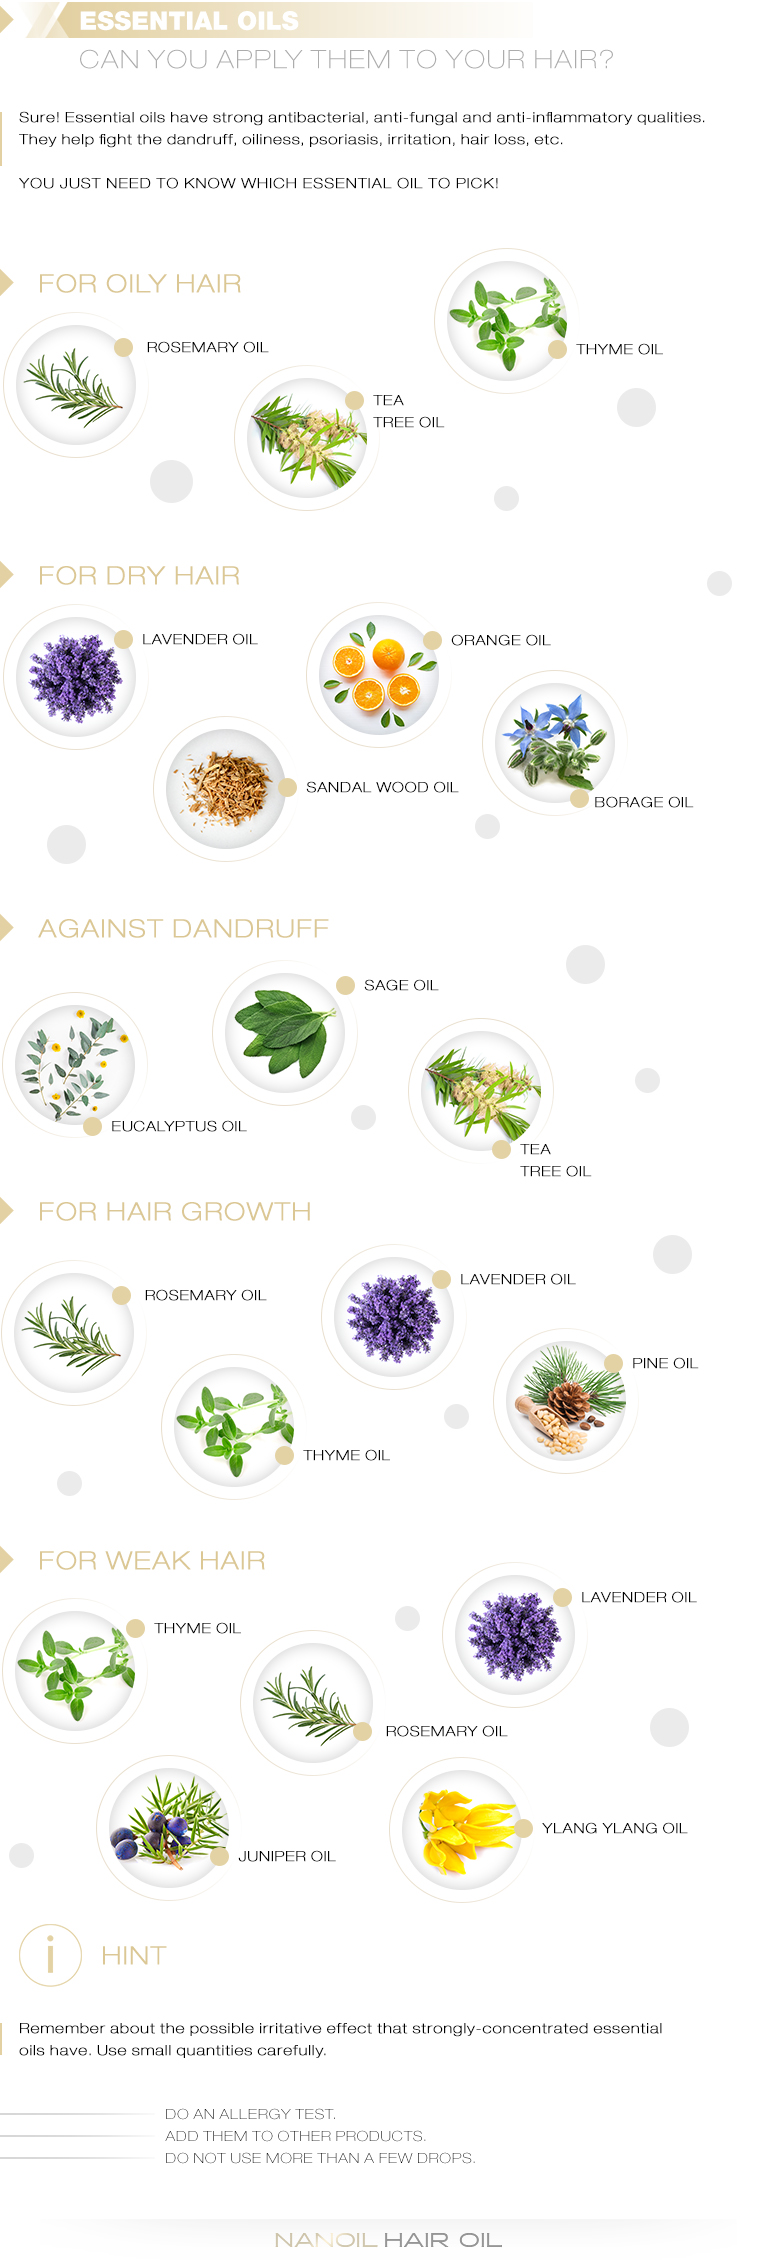 Essential oils - can you apply them to hair